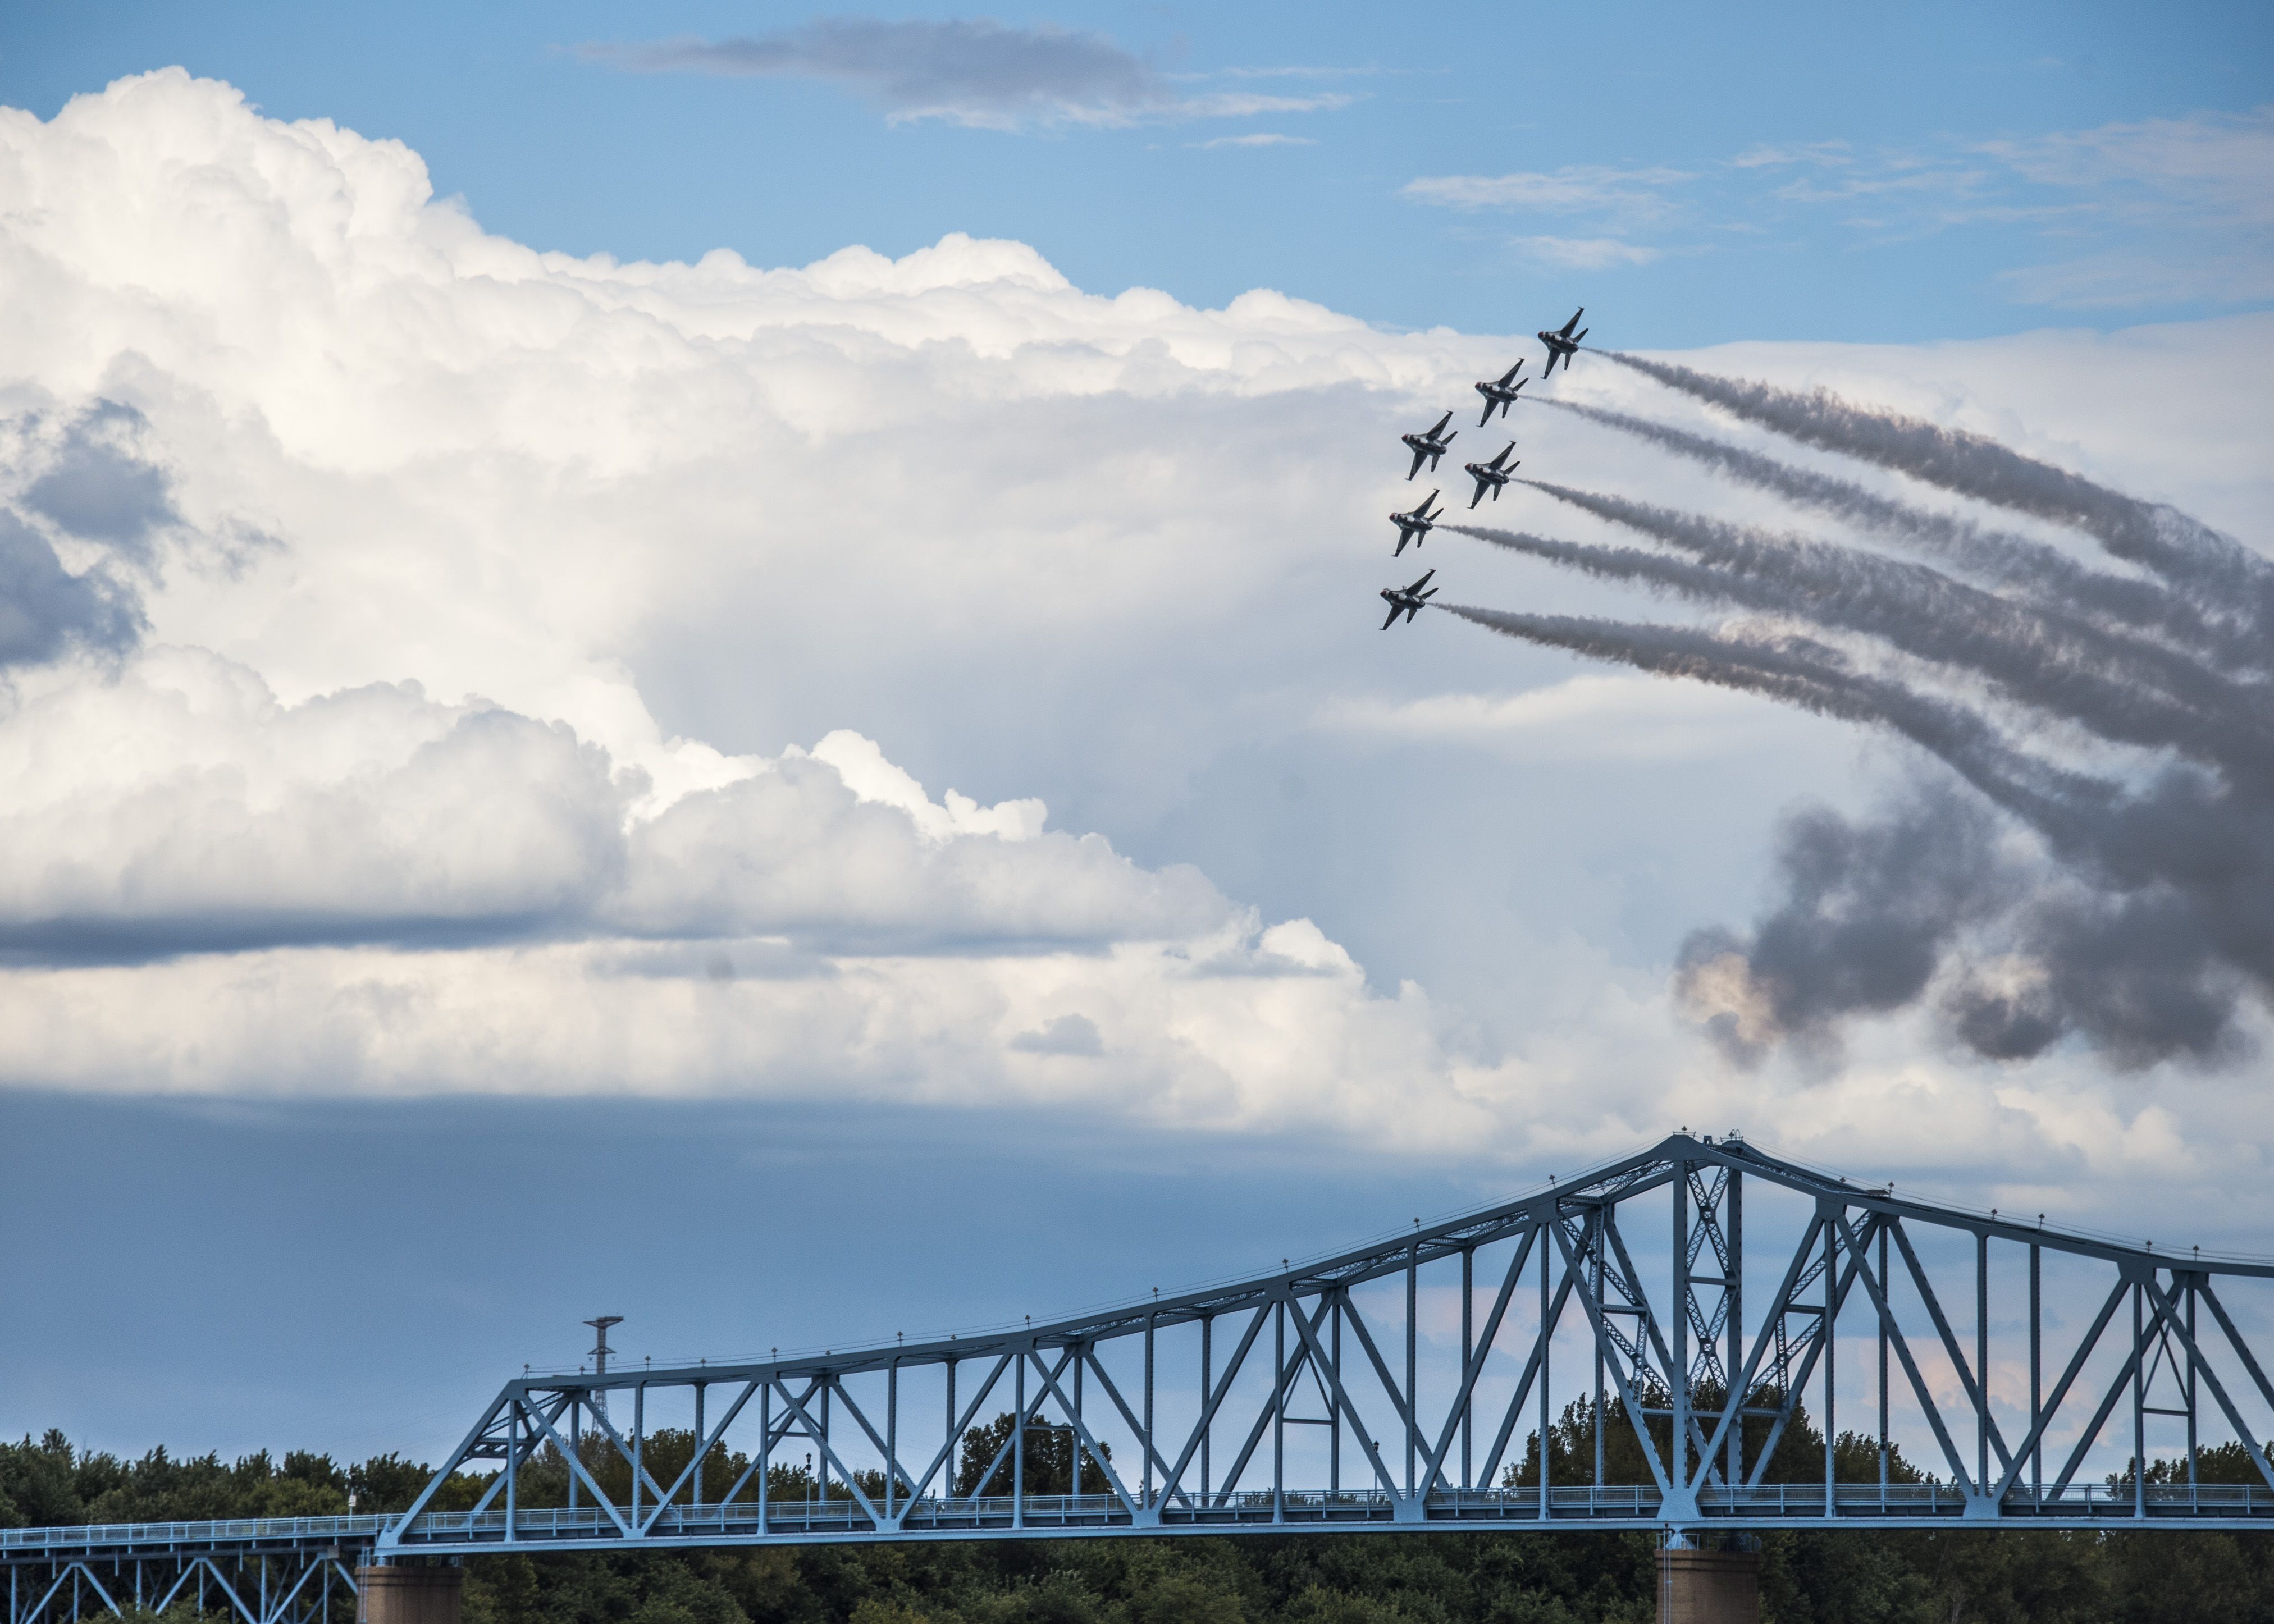 Air show crowd tops 70,000 over weekend Visit Owensboro, KY